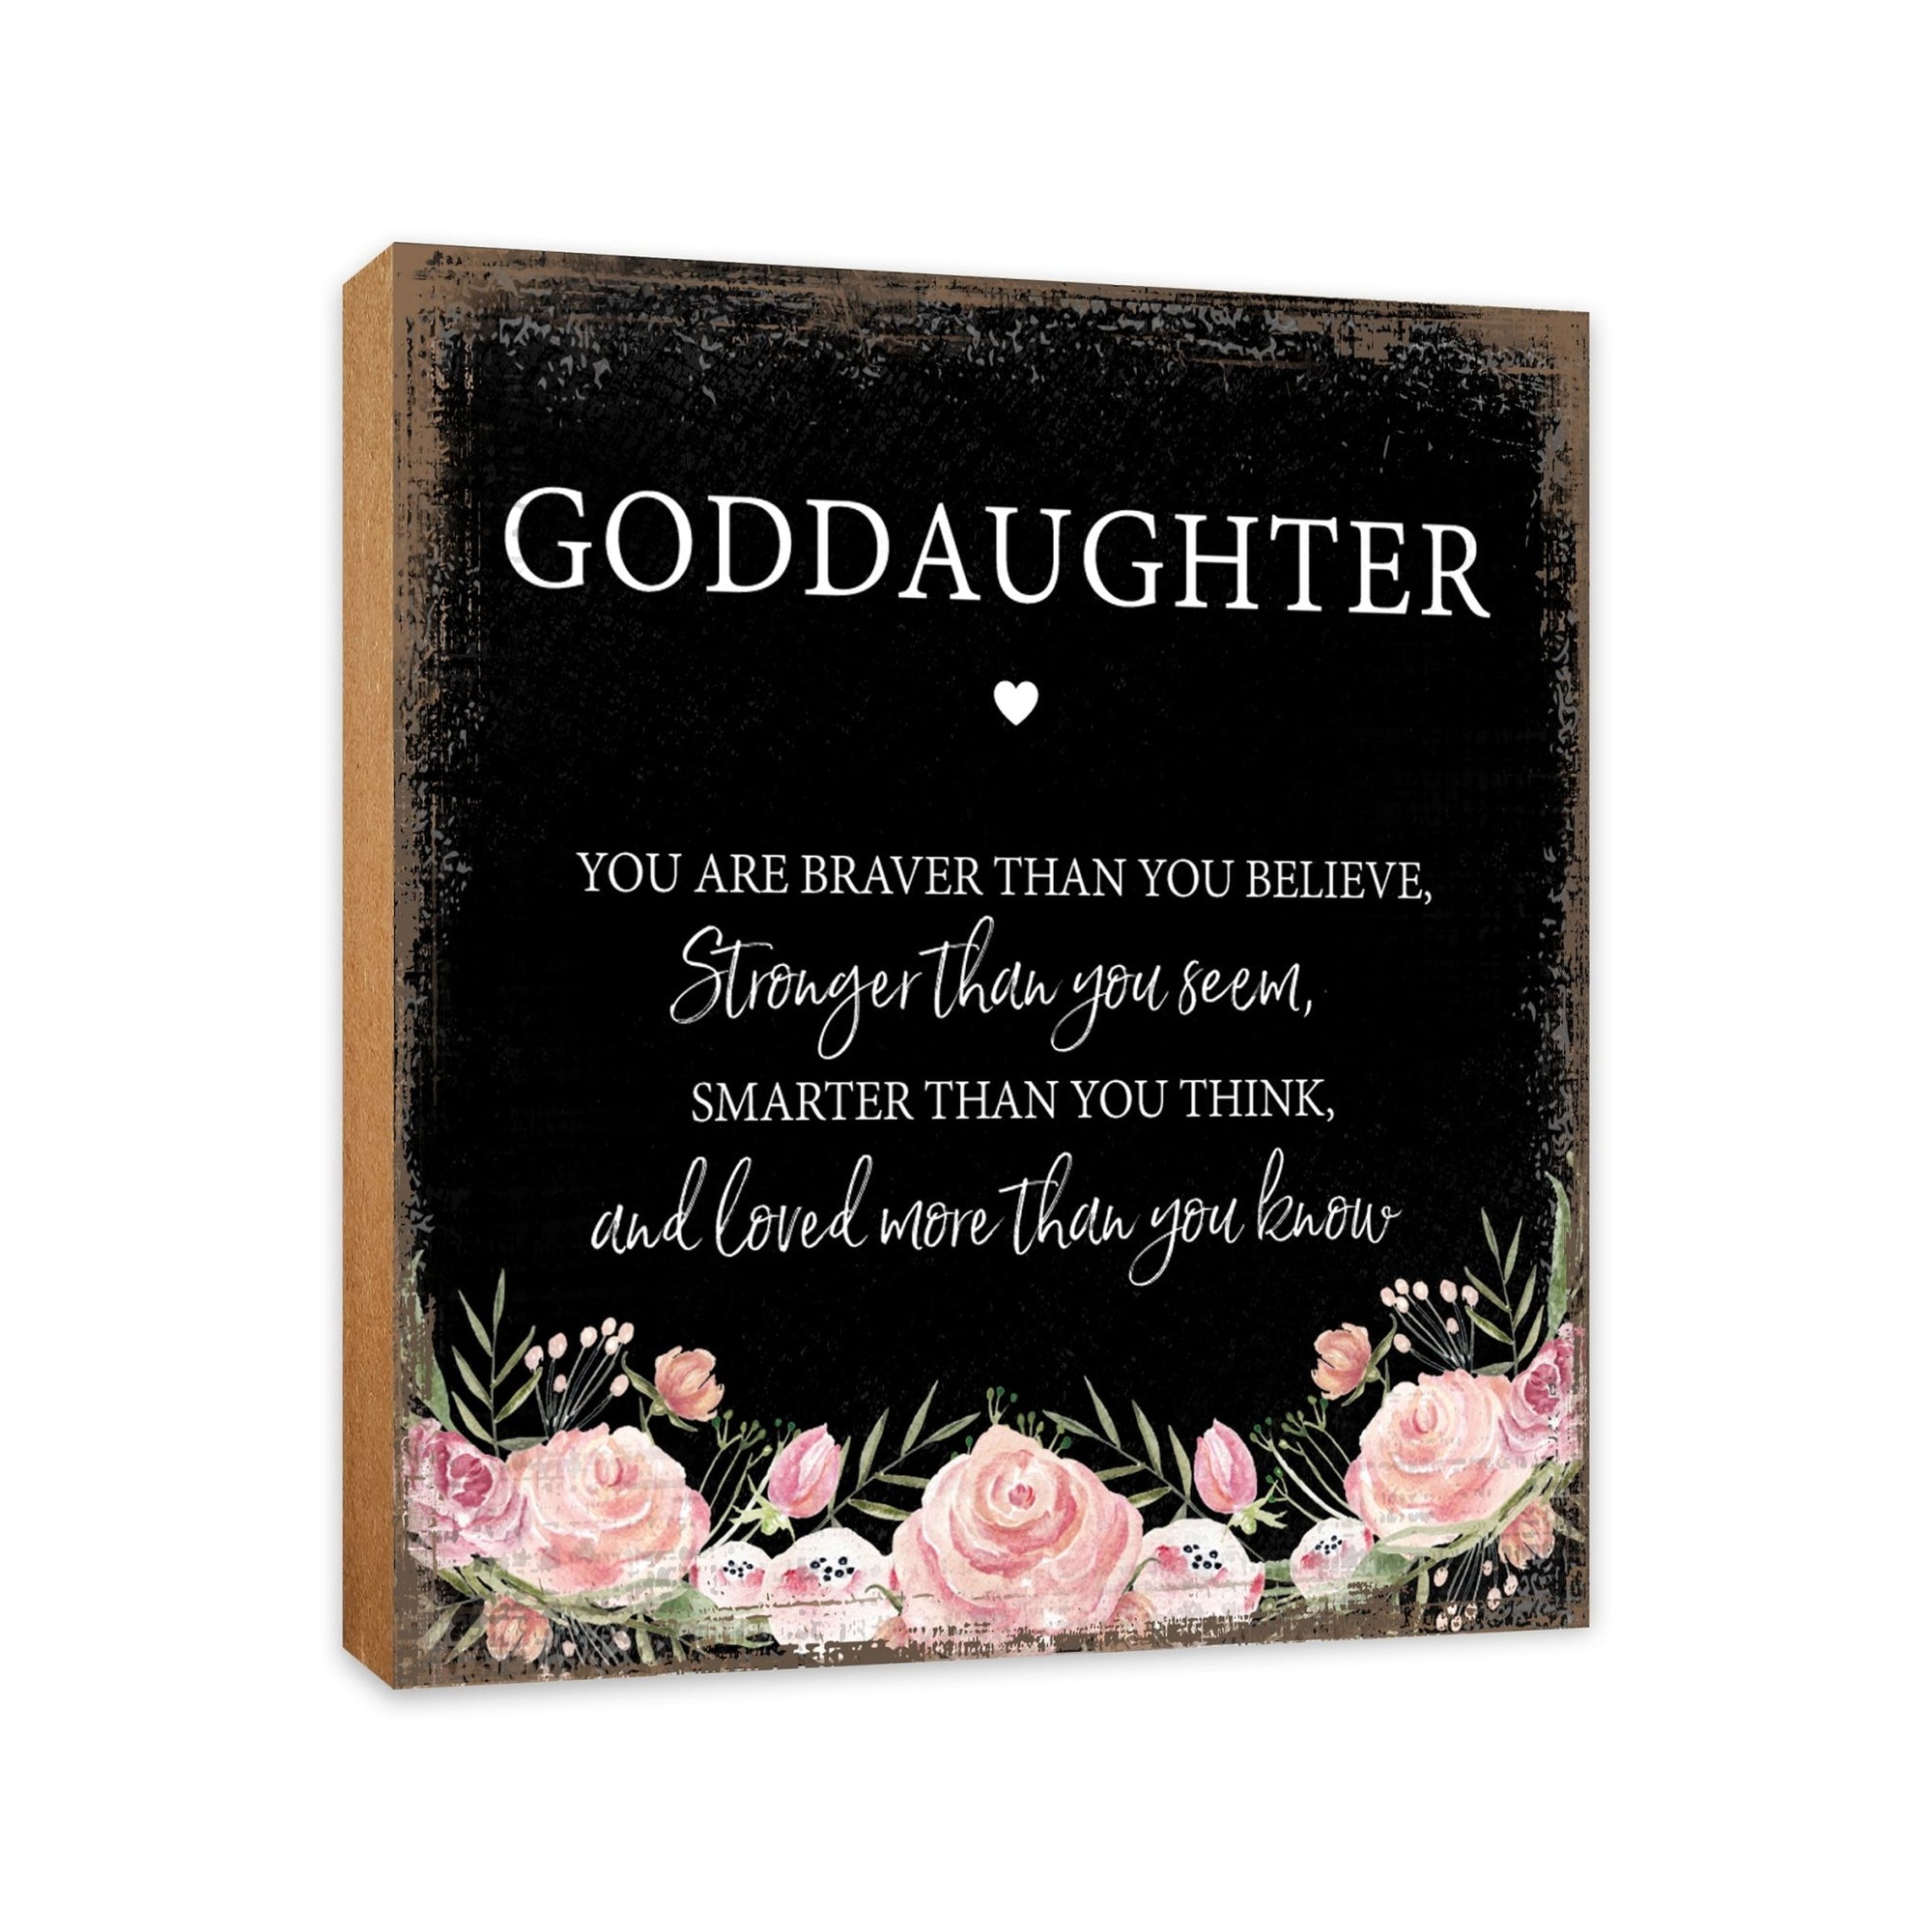 Goddaughter, You Are Braver Floral 6x6 Inches Wood Family Art Sign Tabletop and Shelving For Home Décor - LifeSong Milestones